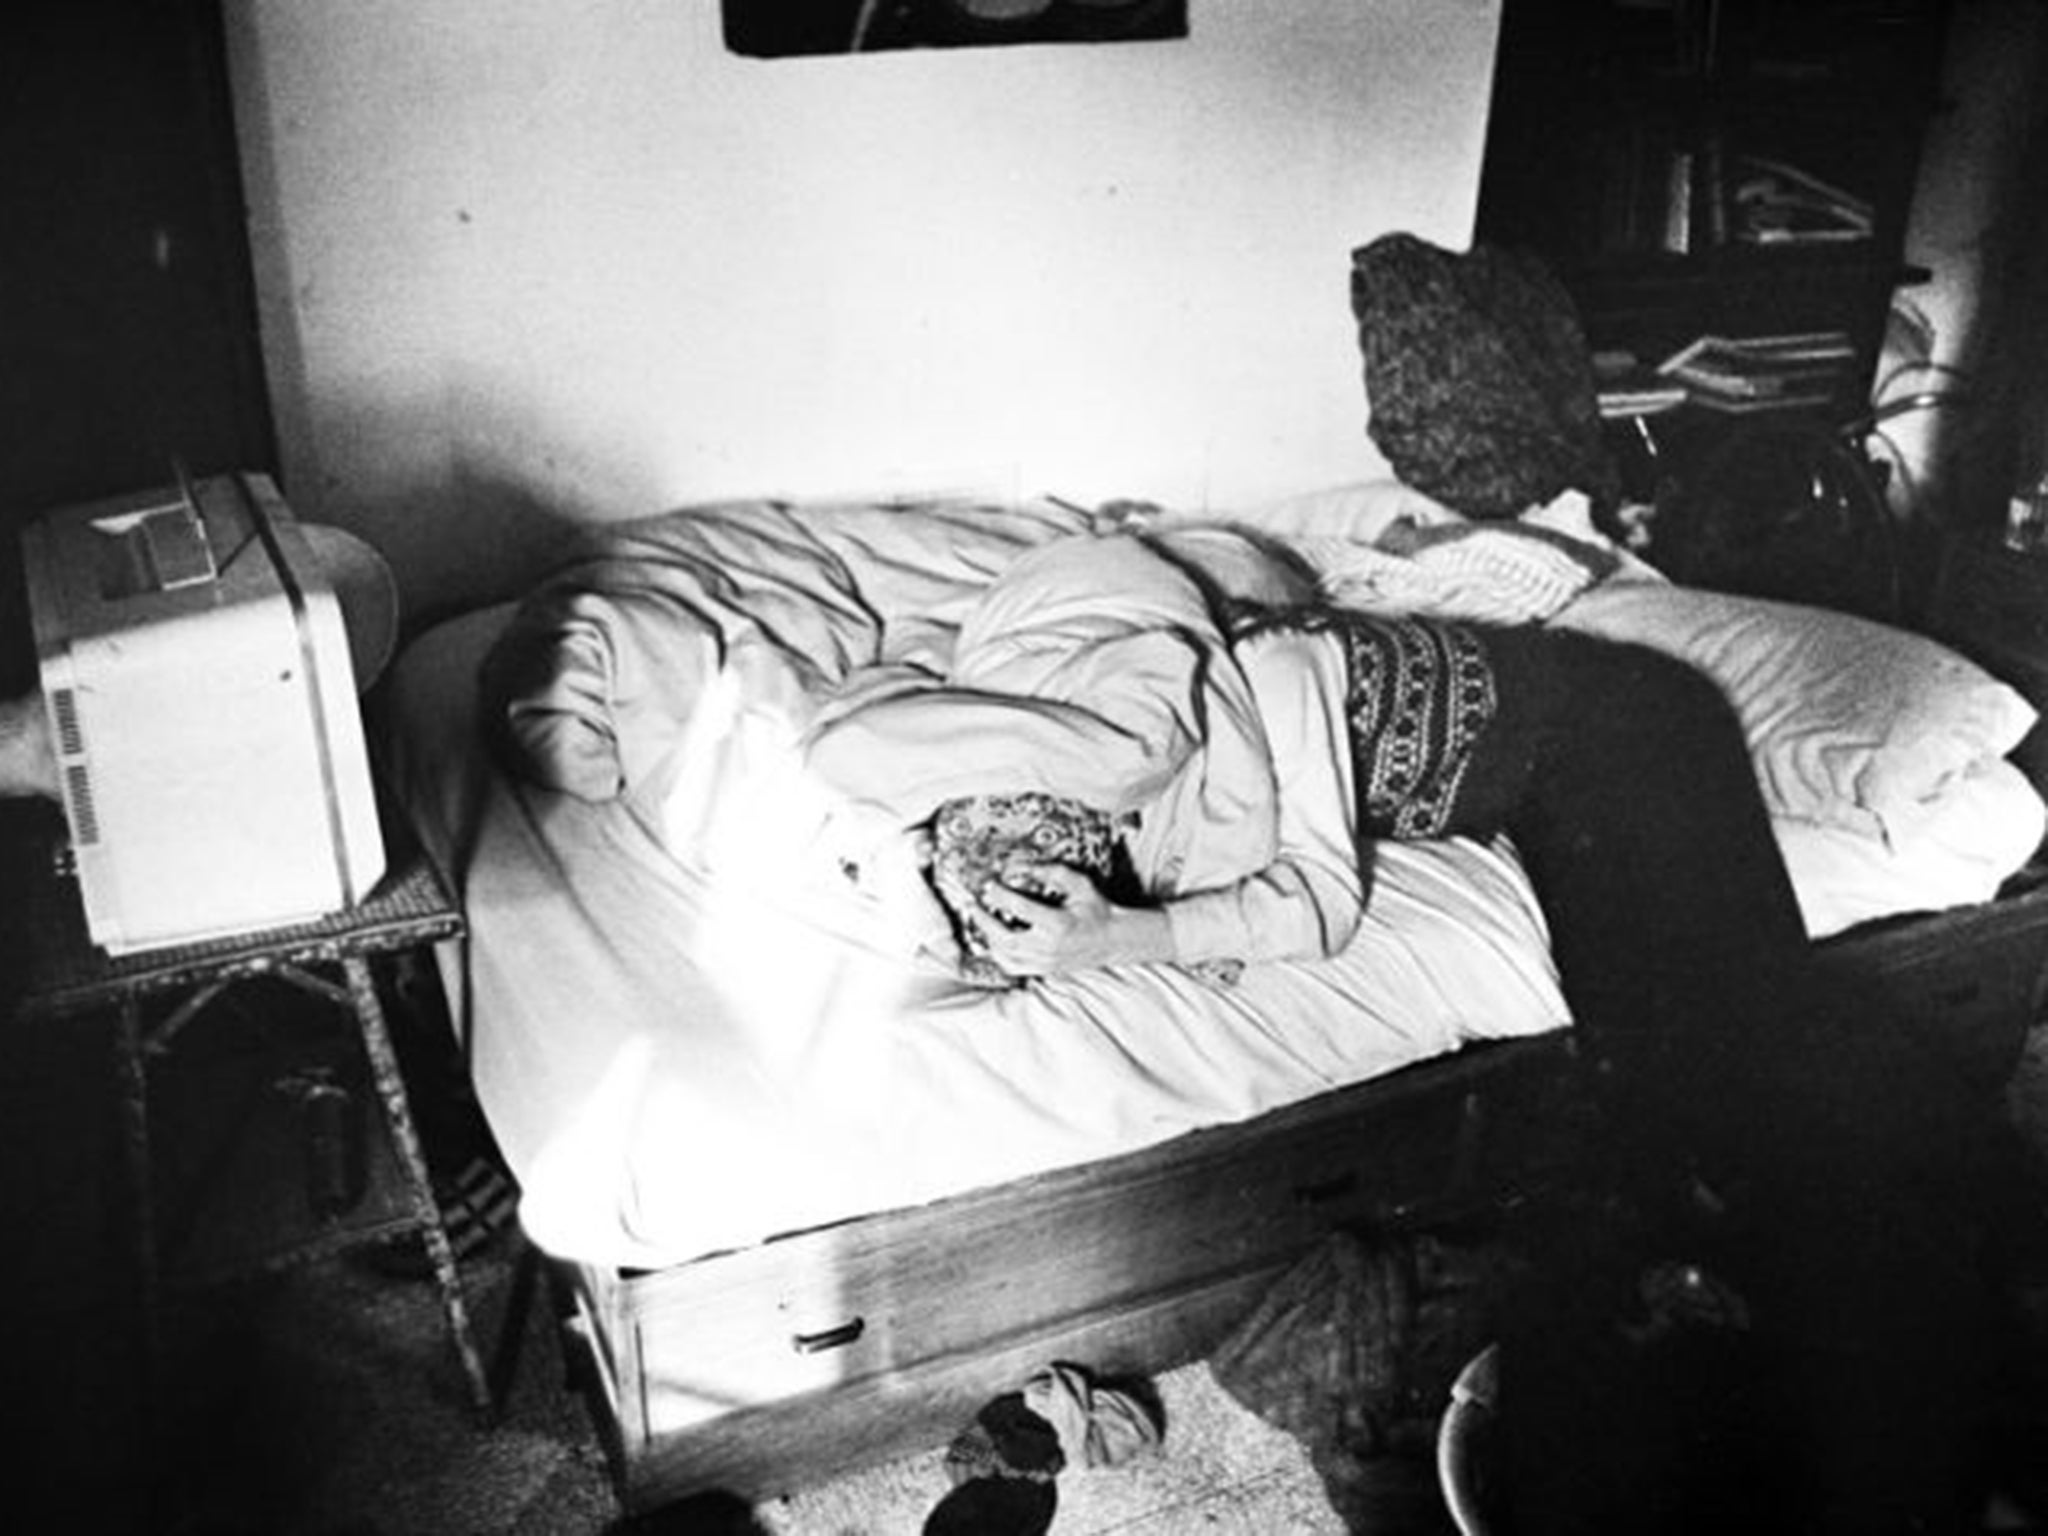 Duvet day: ‘Aaron’s Room (Notting Hill), 1980’ is one of the revealing pictures by former squatter Mark Cawson now showing at ICA